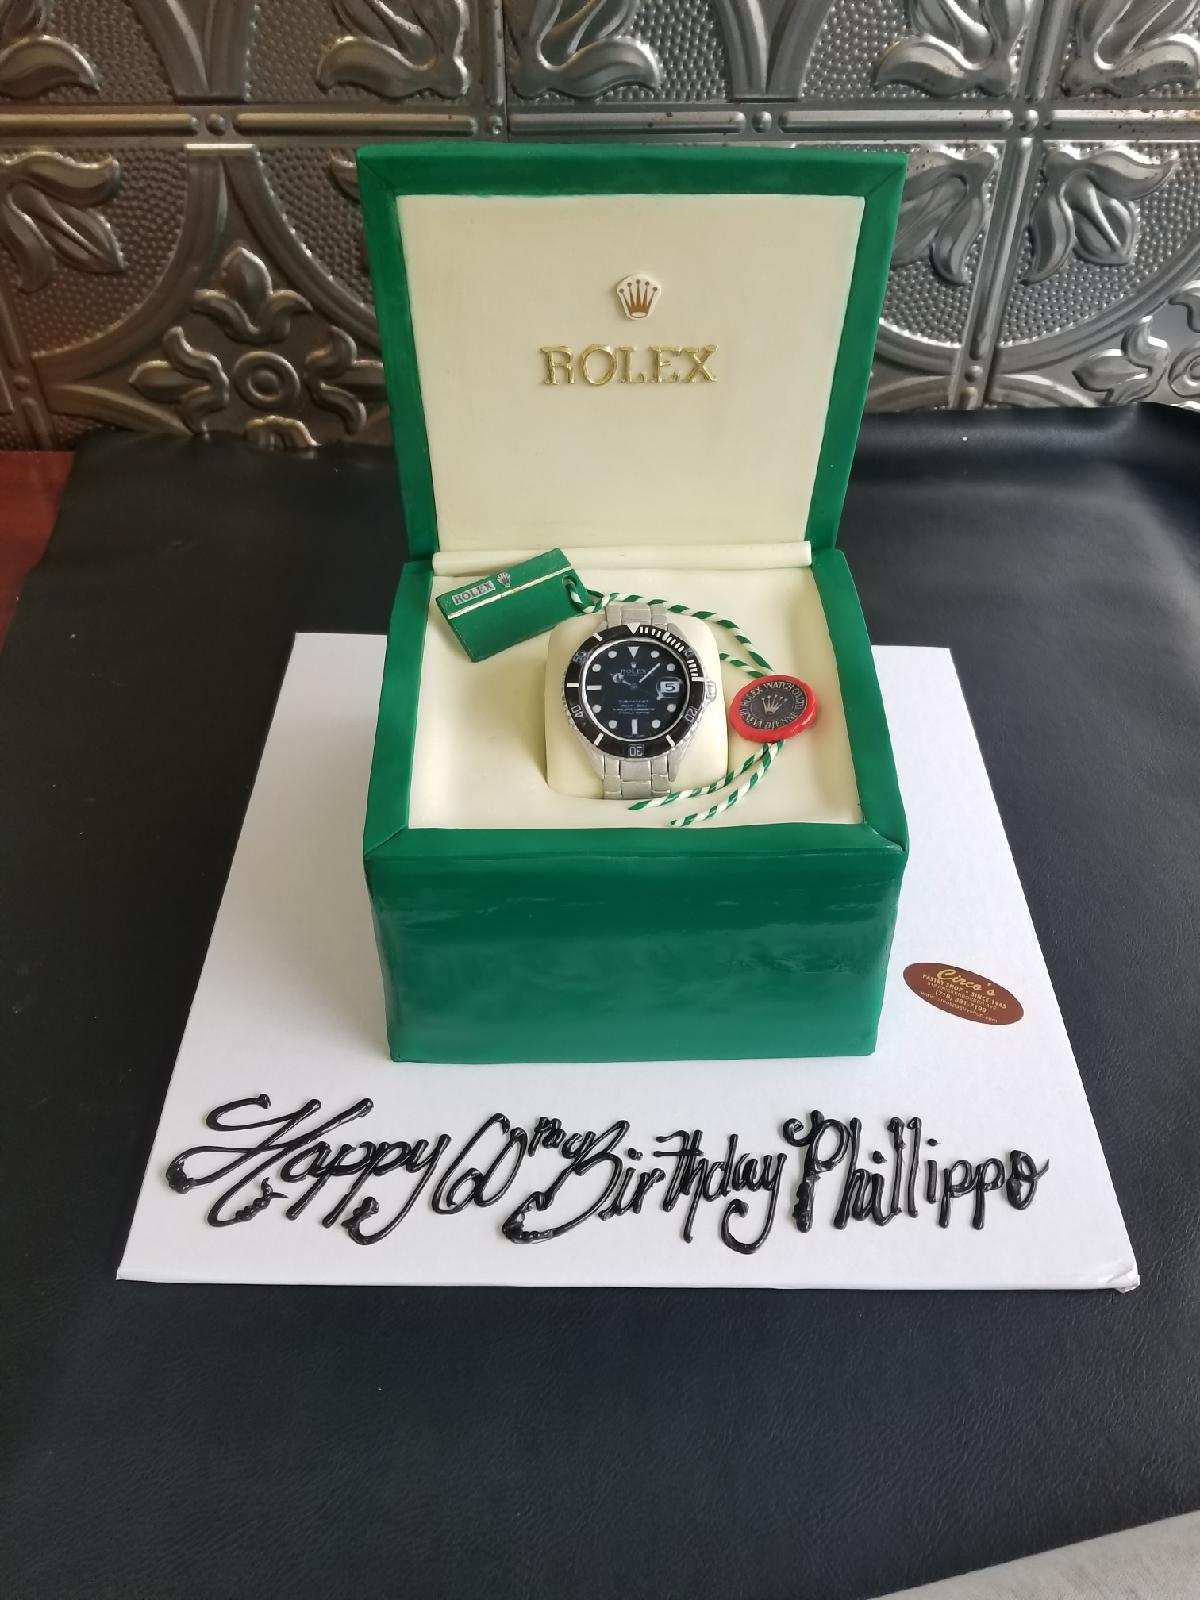 I got this birthday cake for my 40th. My wife knows me too well : r/rolex